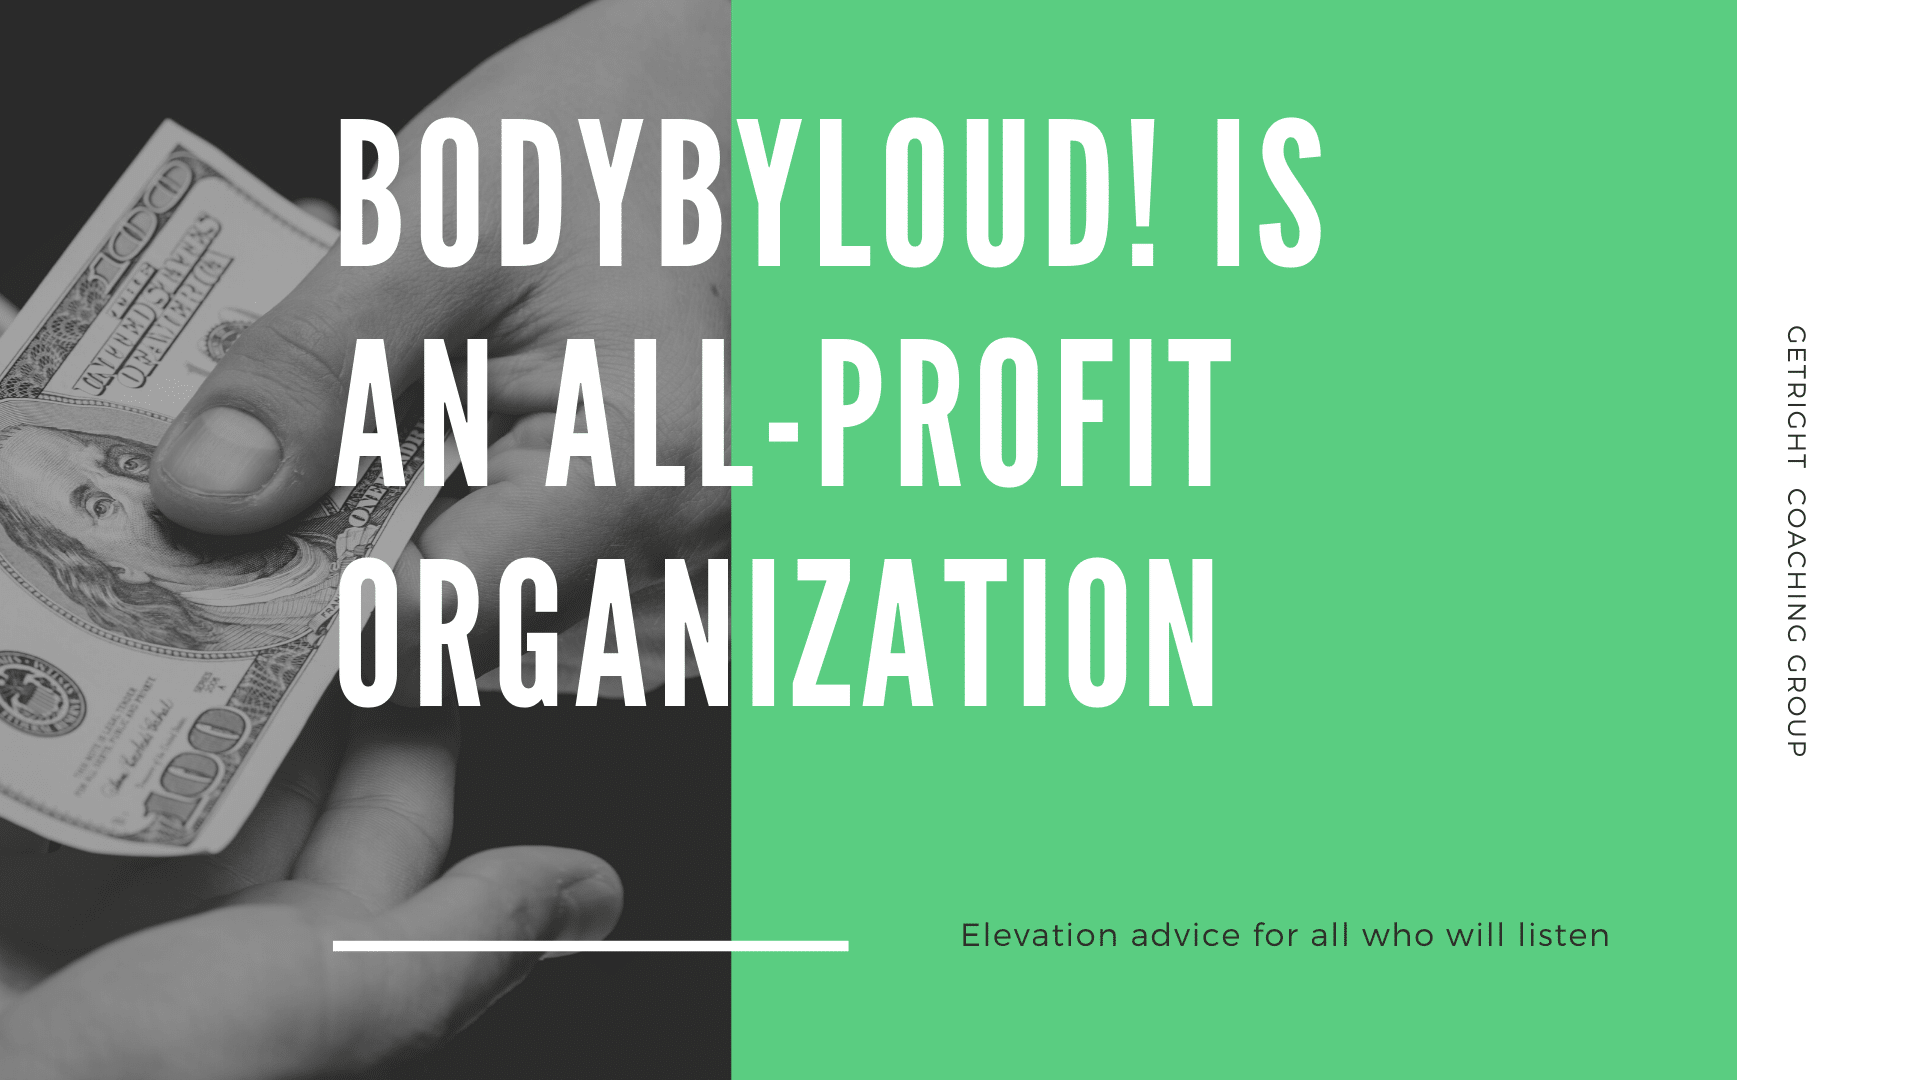 Bodybyloud Is an All Profit Organization